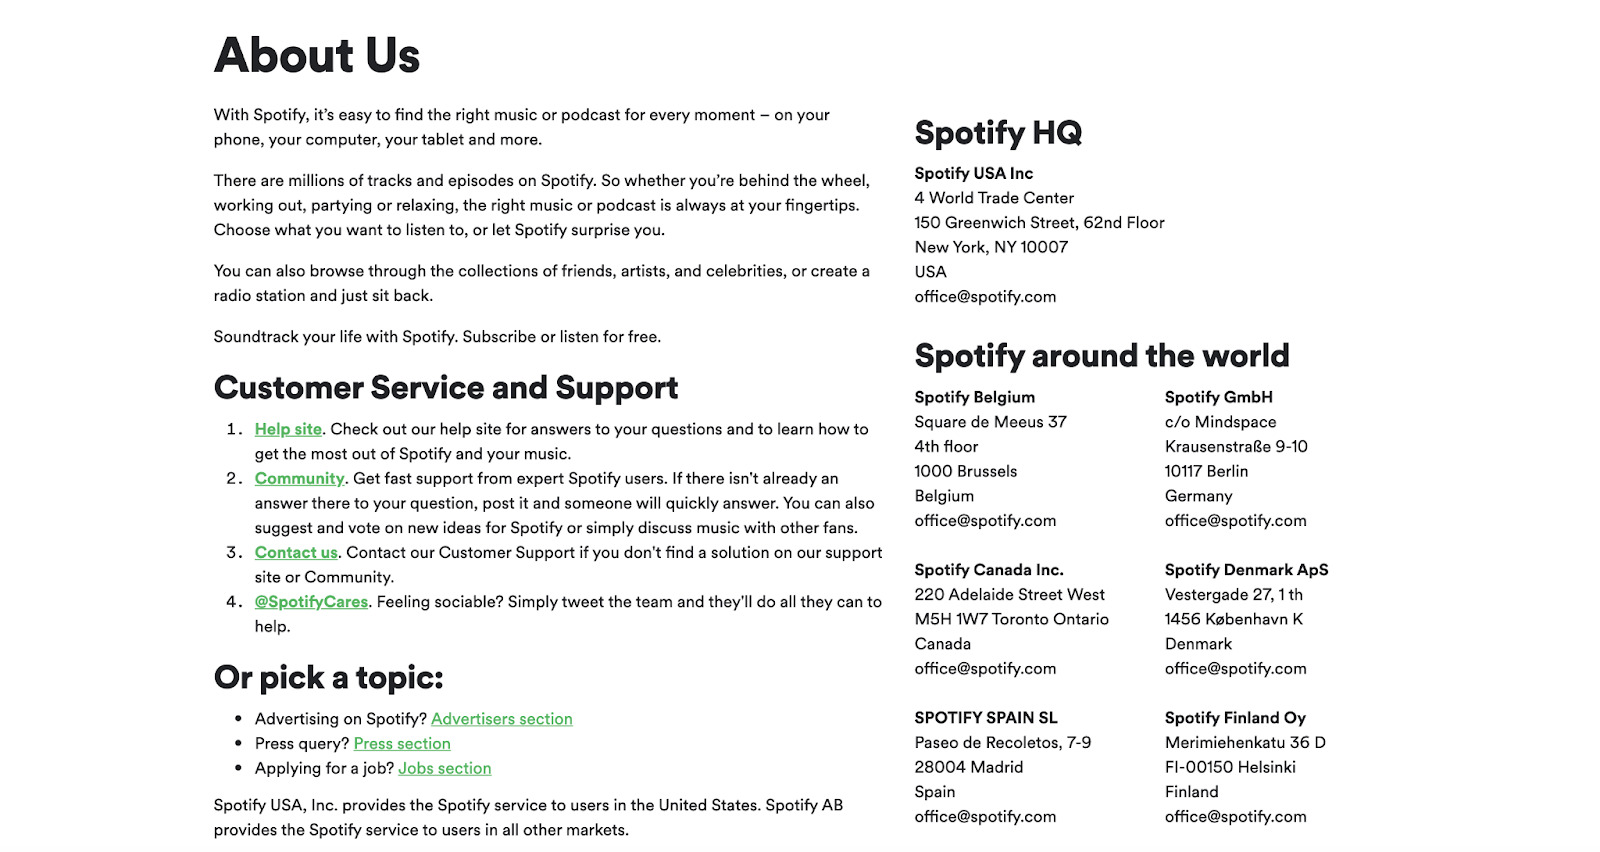 Only essential information is found on Spotify’s About Us page.